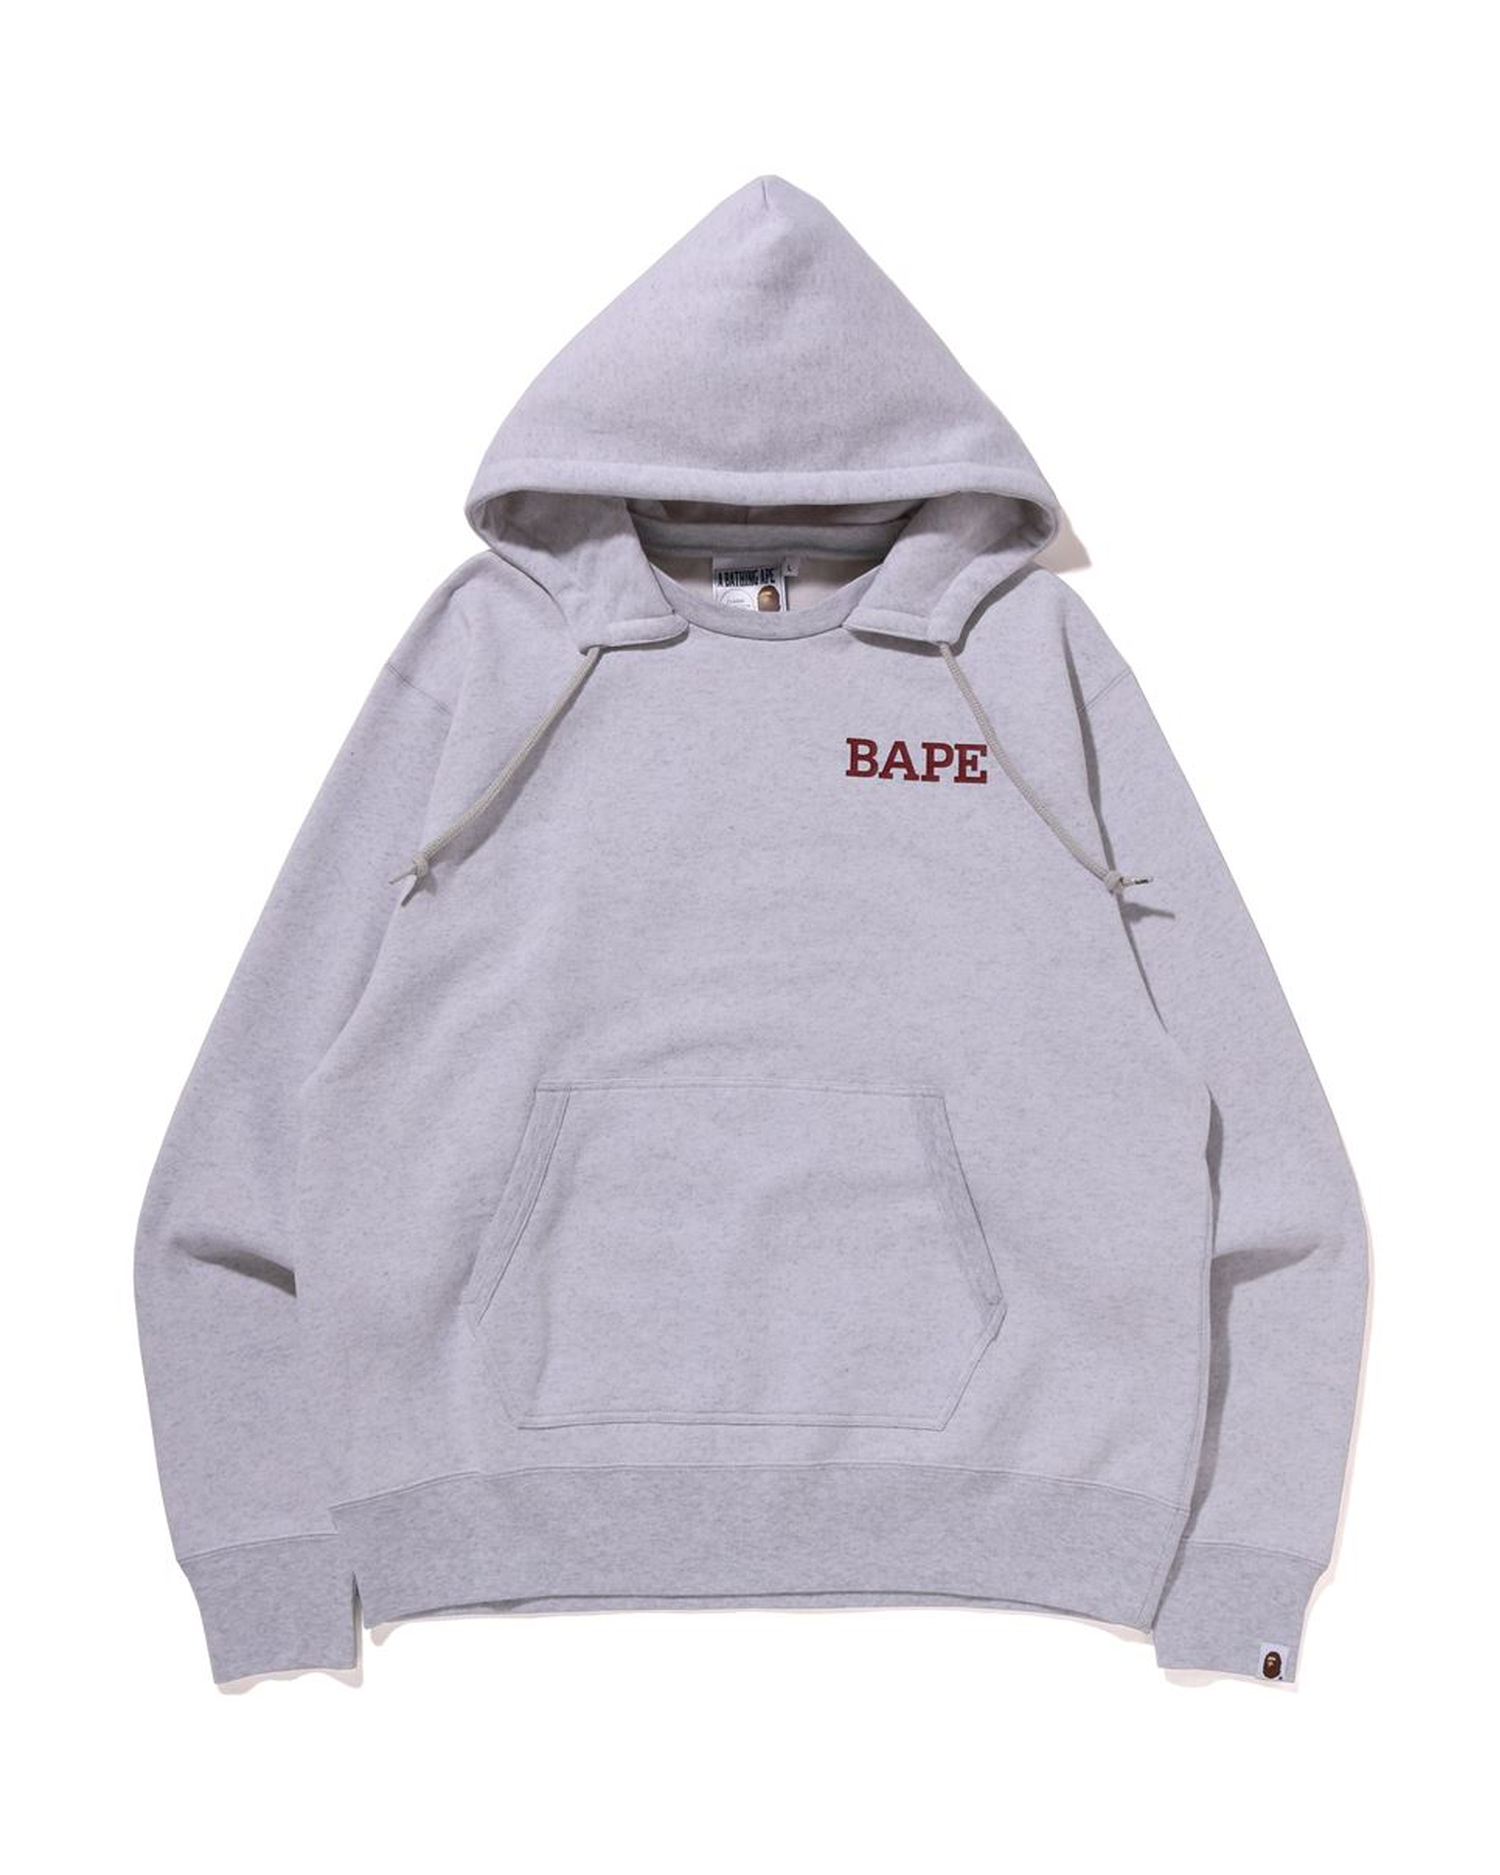 Shop A Bathing Ape Relaxed Fit Pullover Hoodie Online | BAPE